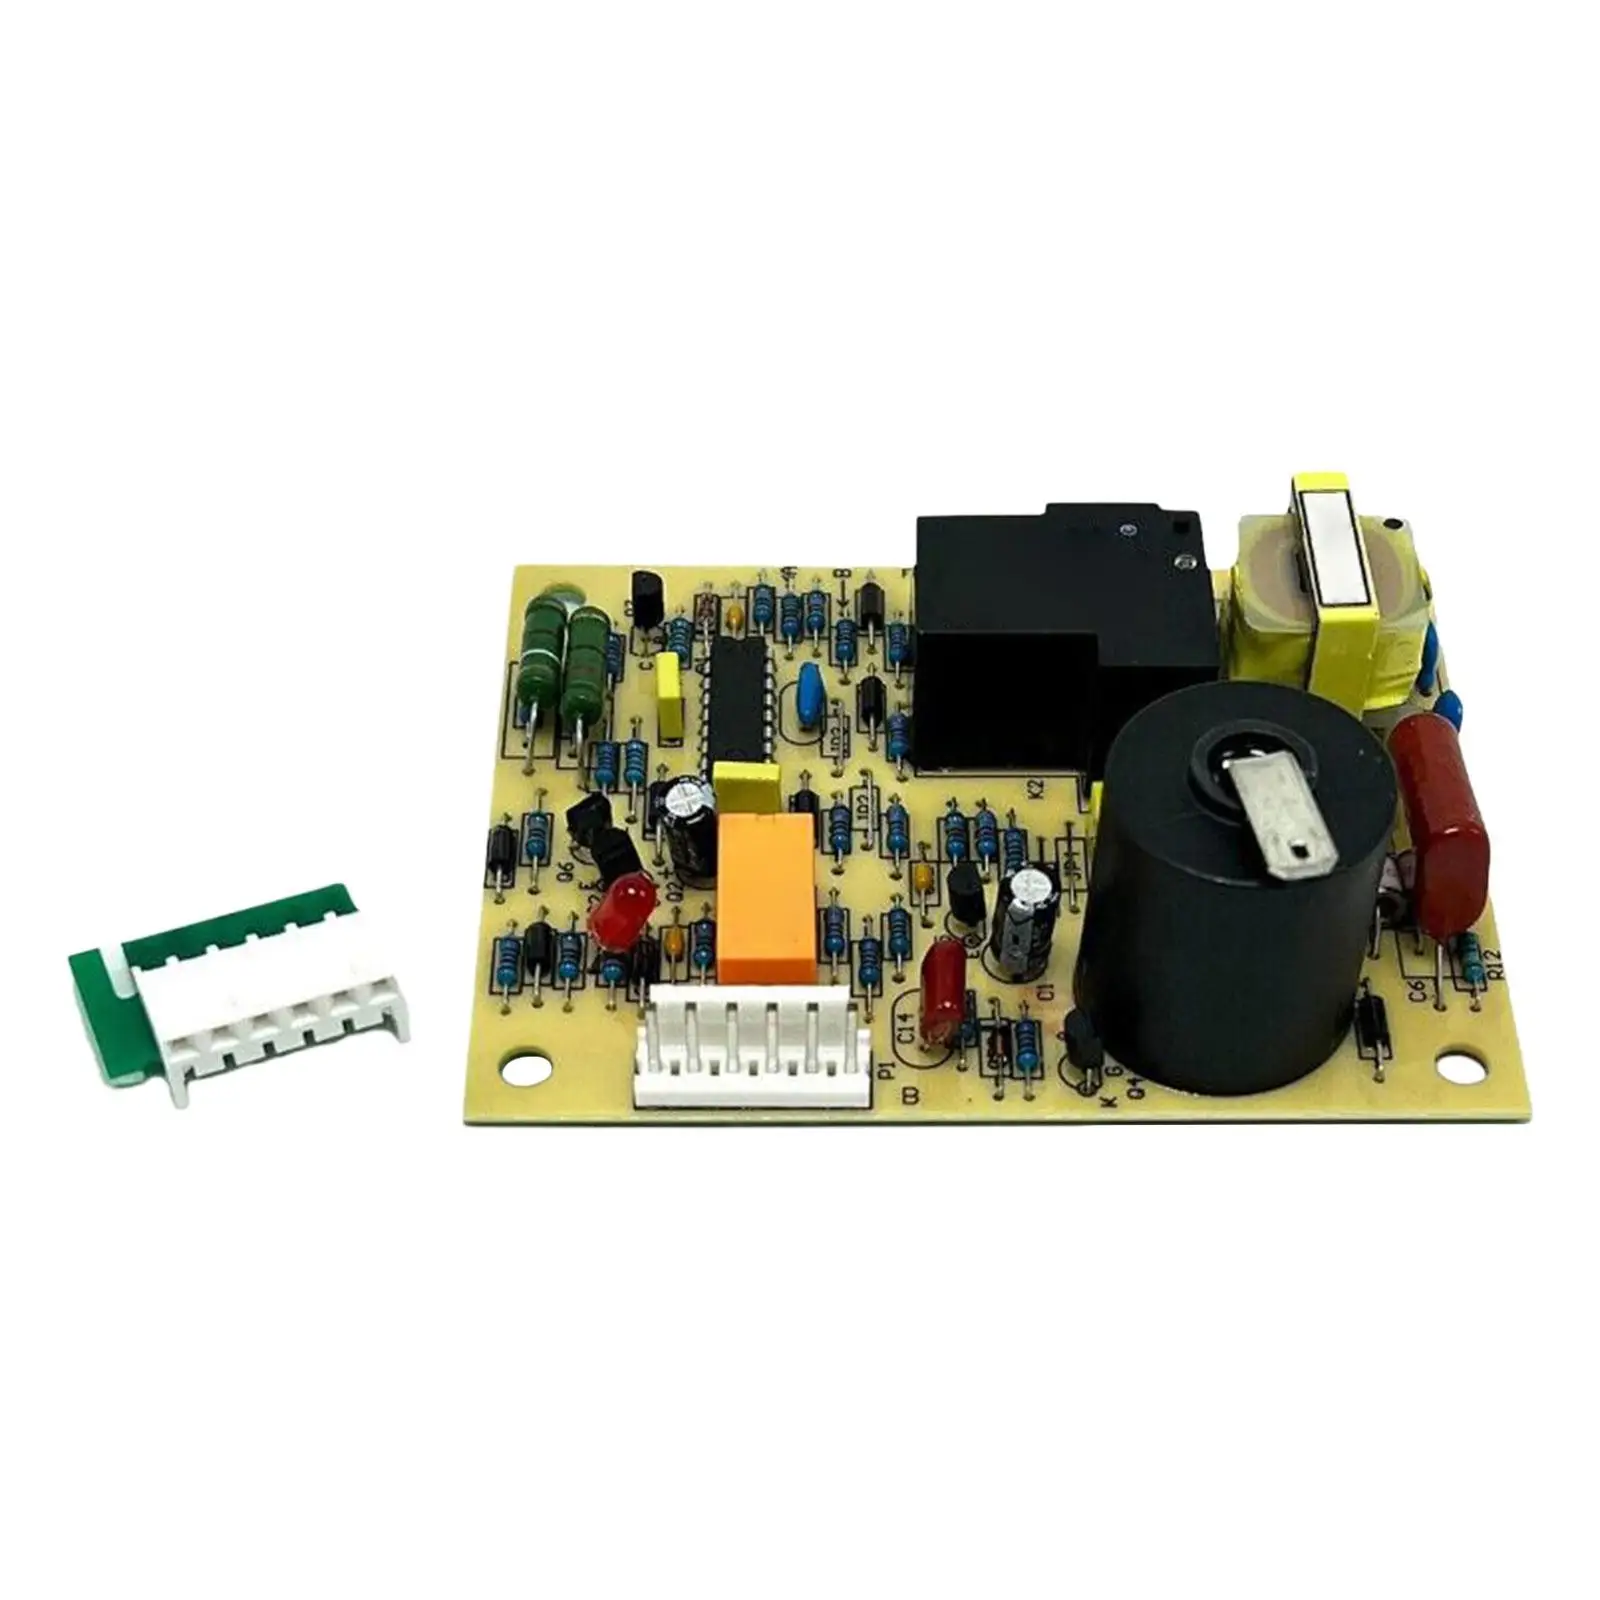 

Ignition Control Circuit Board Premium 31501 for 7912-ii 7920-ii Afmd35